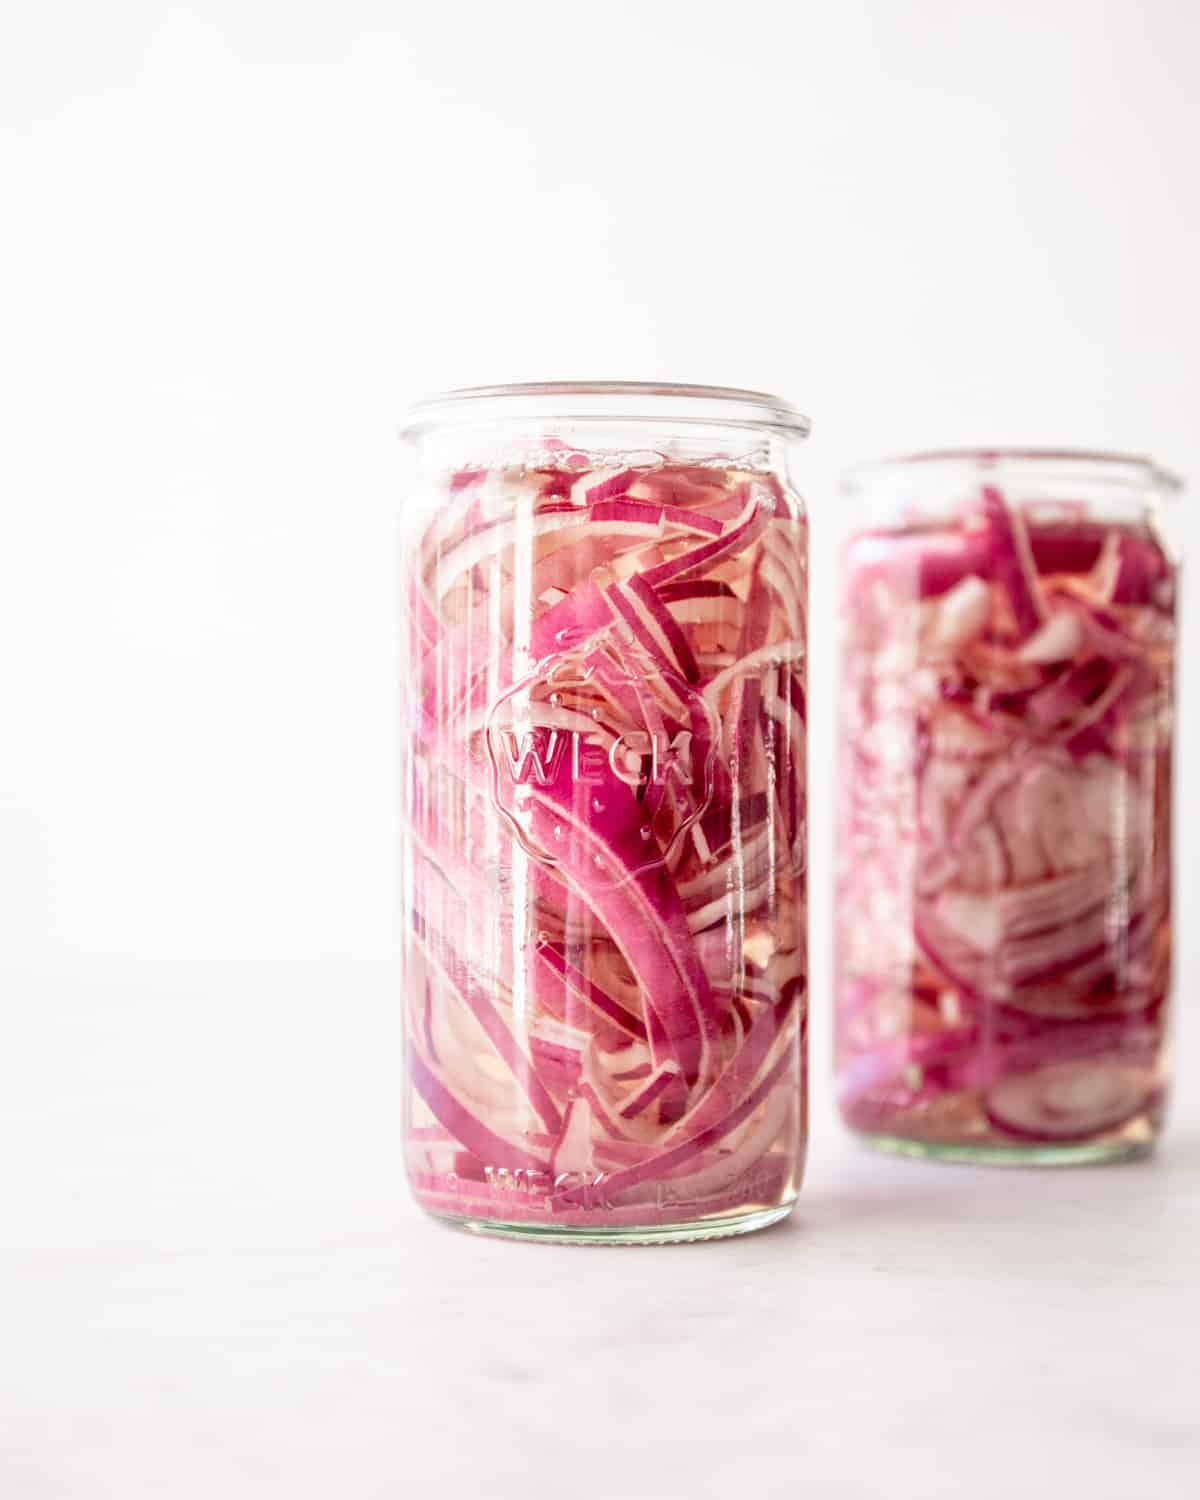 red onions pickling in glass jars